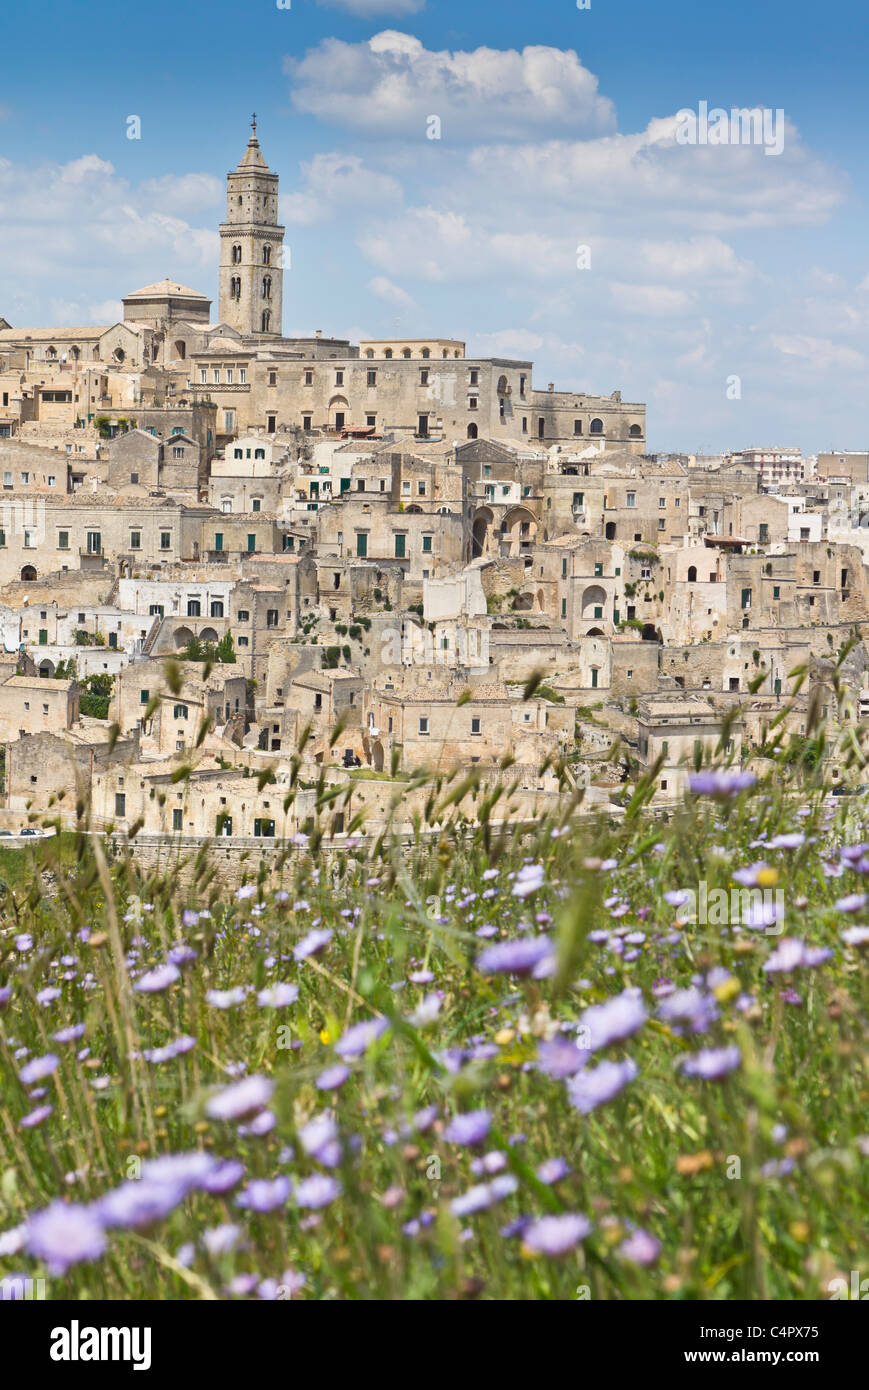 Matera, in the Basilicata, famous for its cave houses in the Sassi districts, built on one bank of the Gravina river canyon. Stock Photo